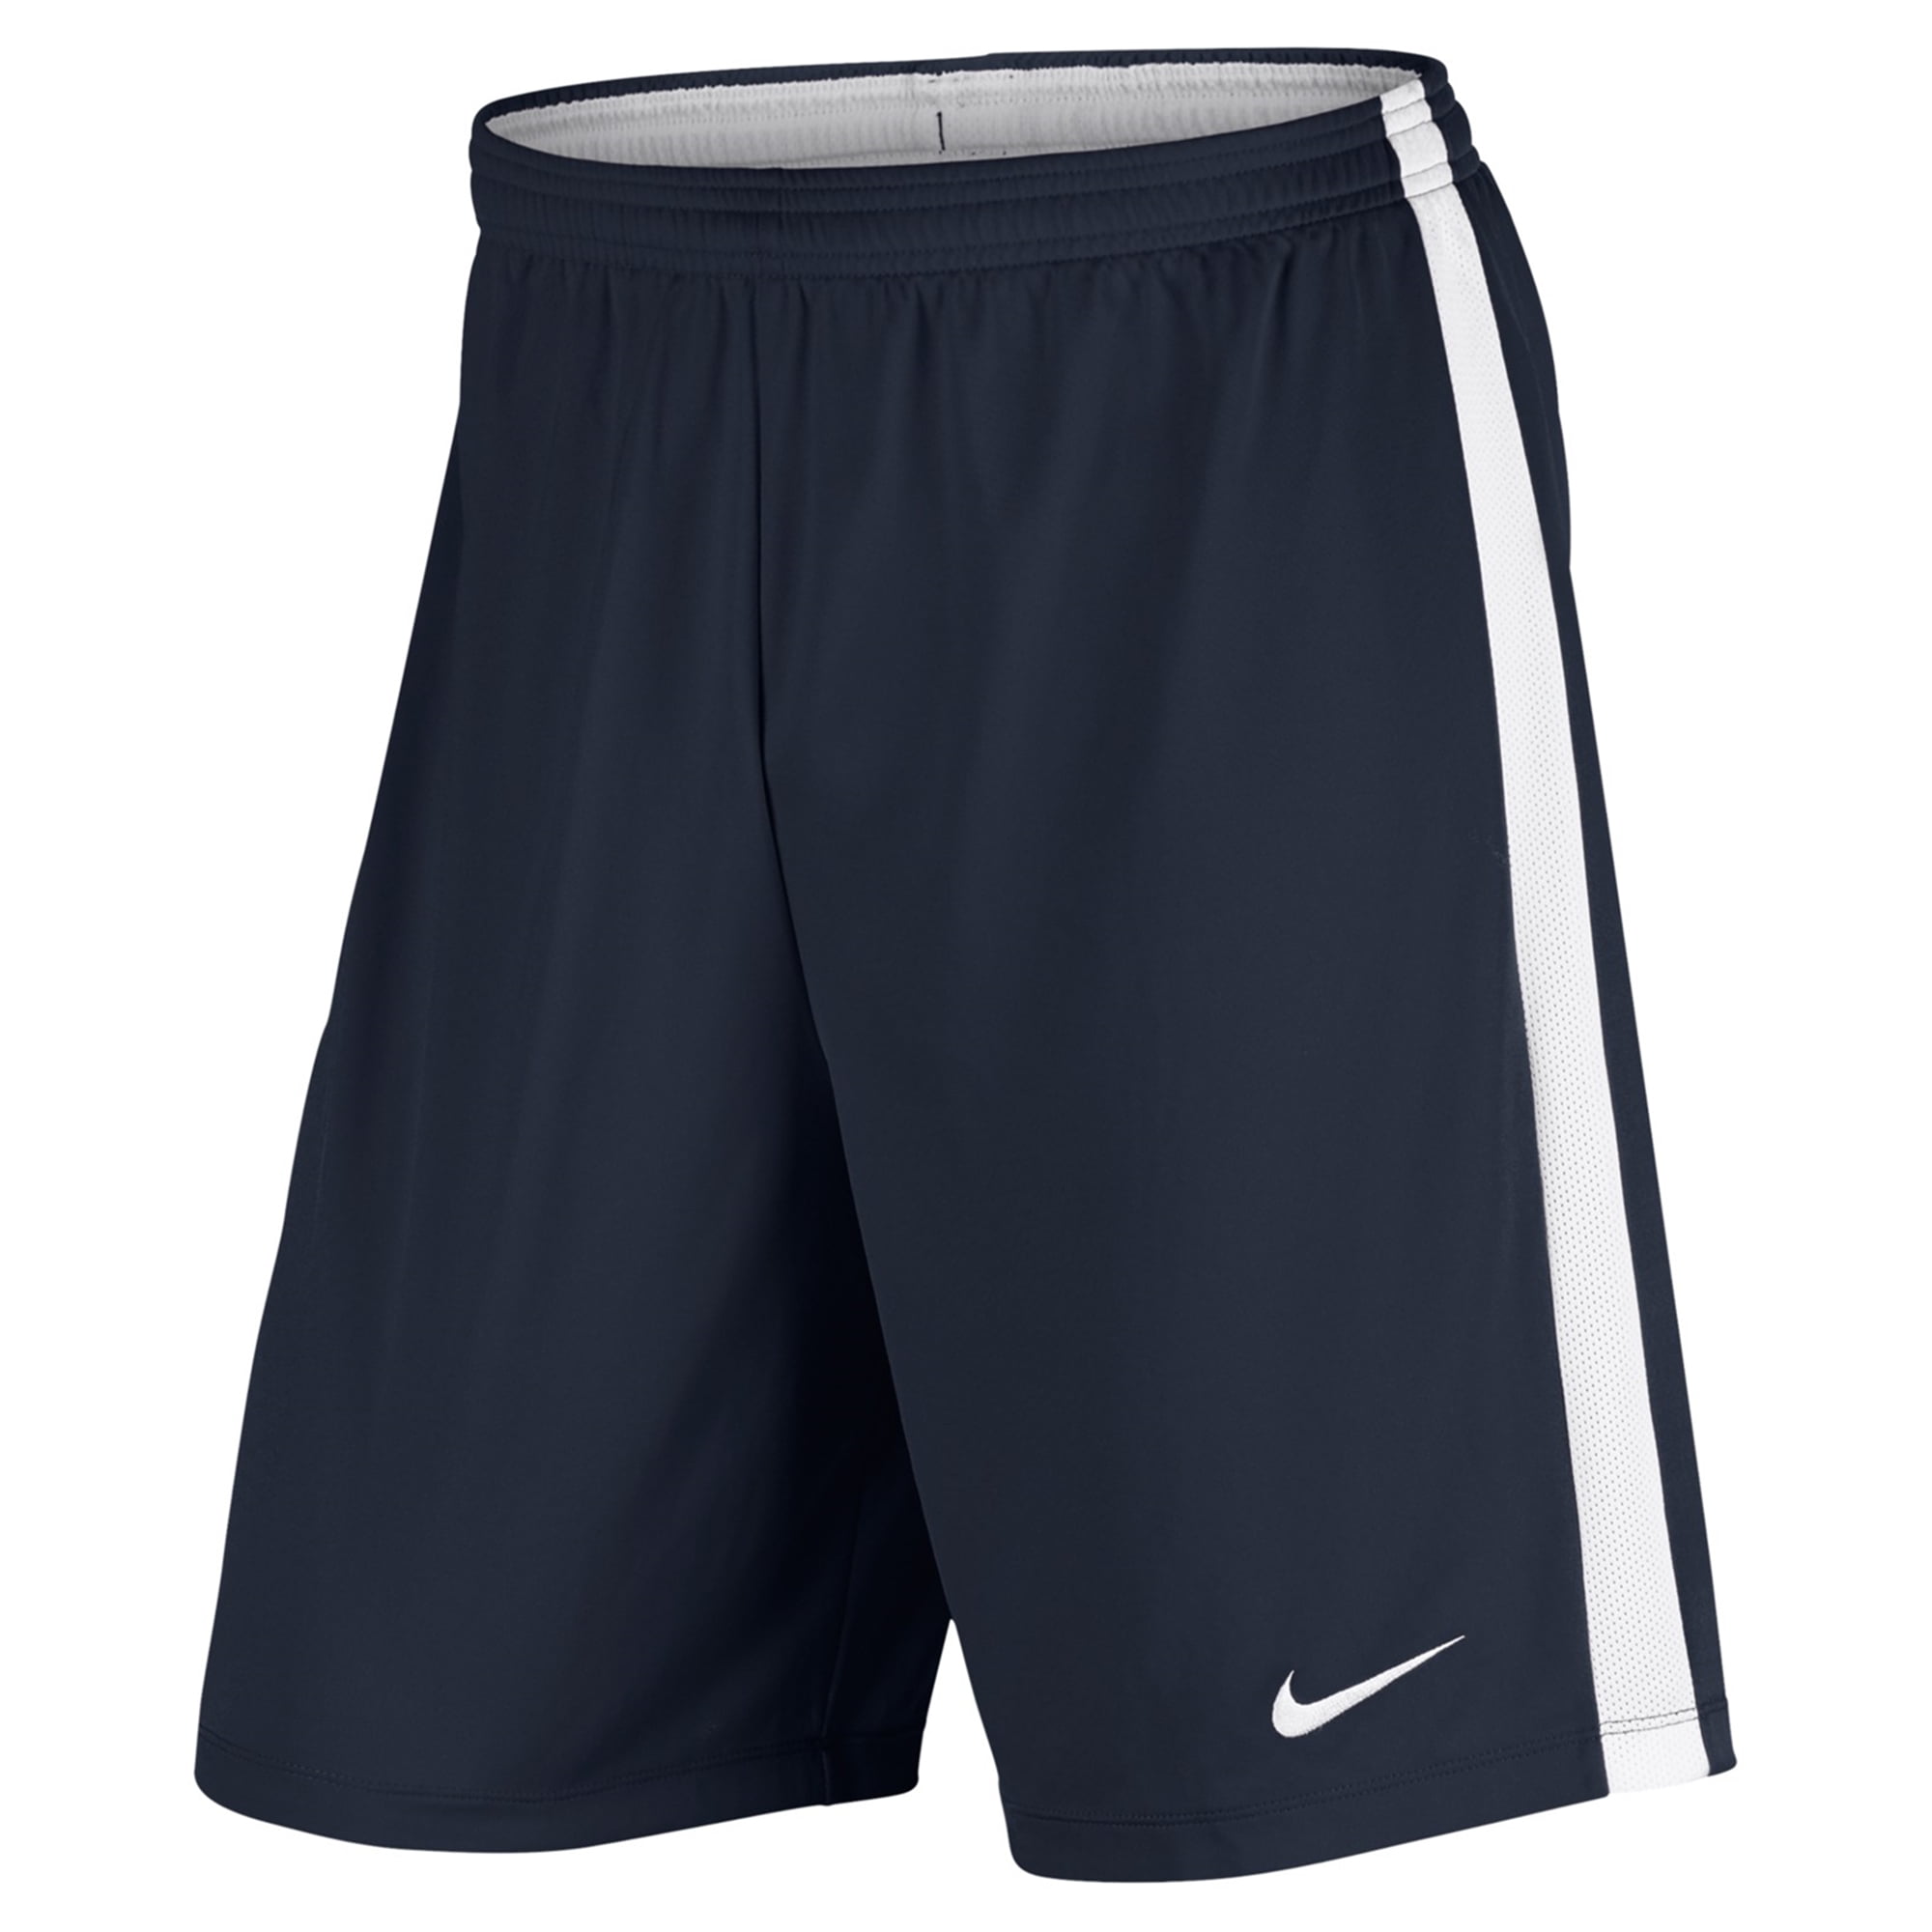 Nike Mens Academy Dry Athletic Workout Shorts - Walmart.com